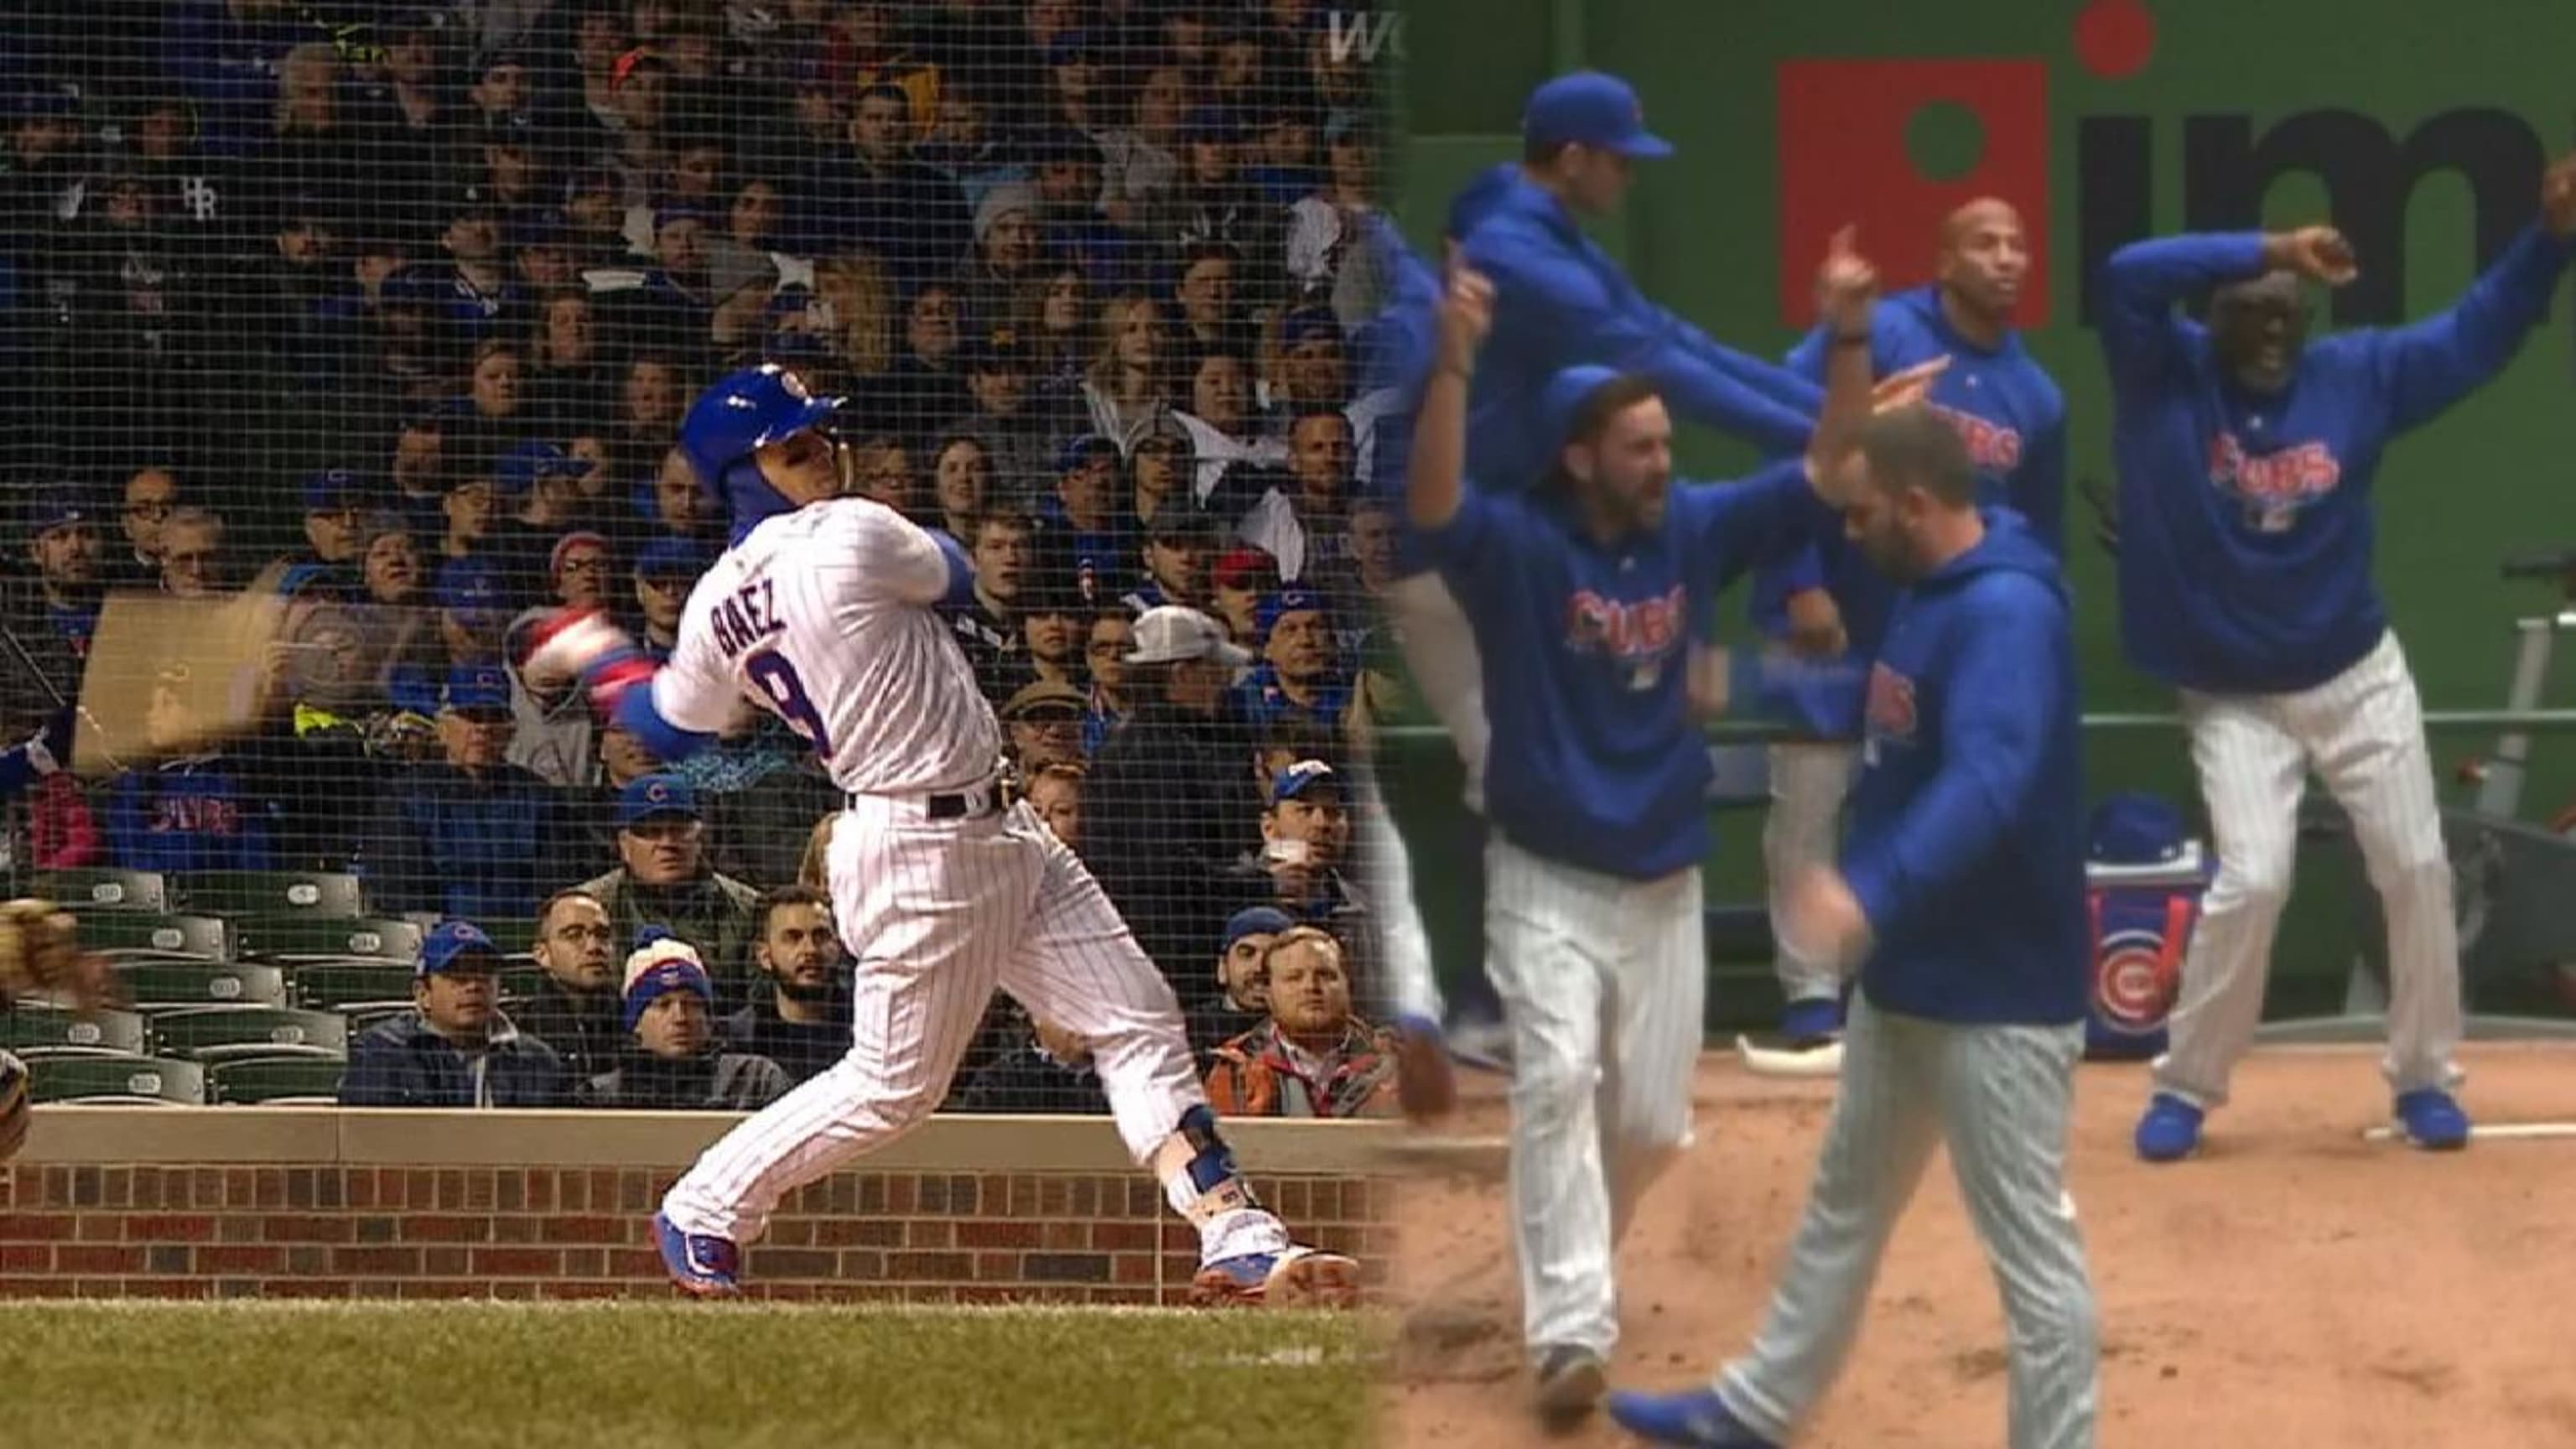 Cubs' bullpen can't stop dancing: 'What should we do? Just sit there?